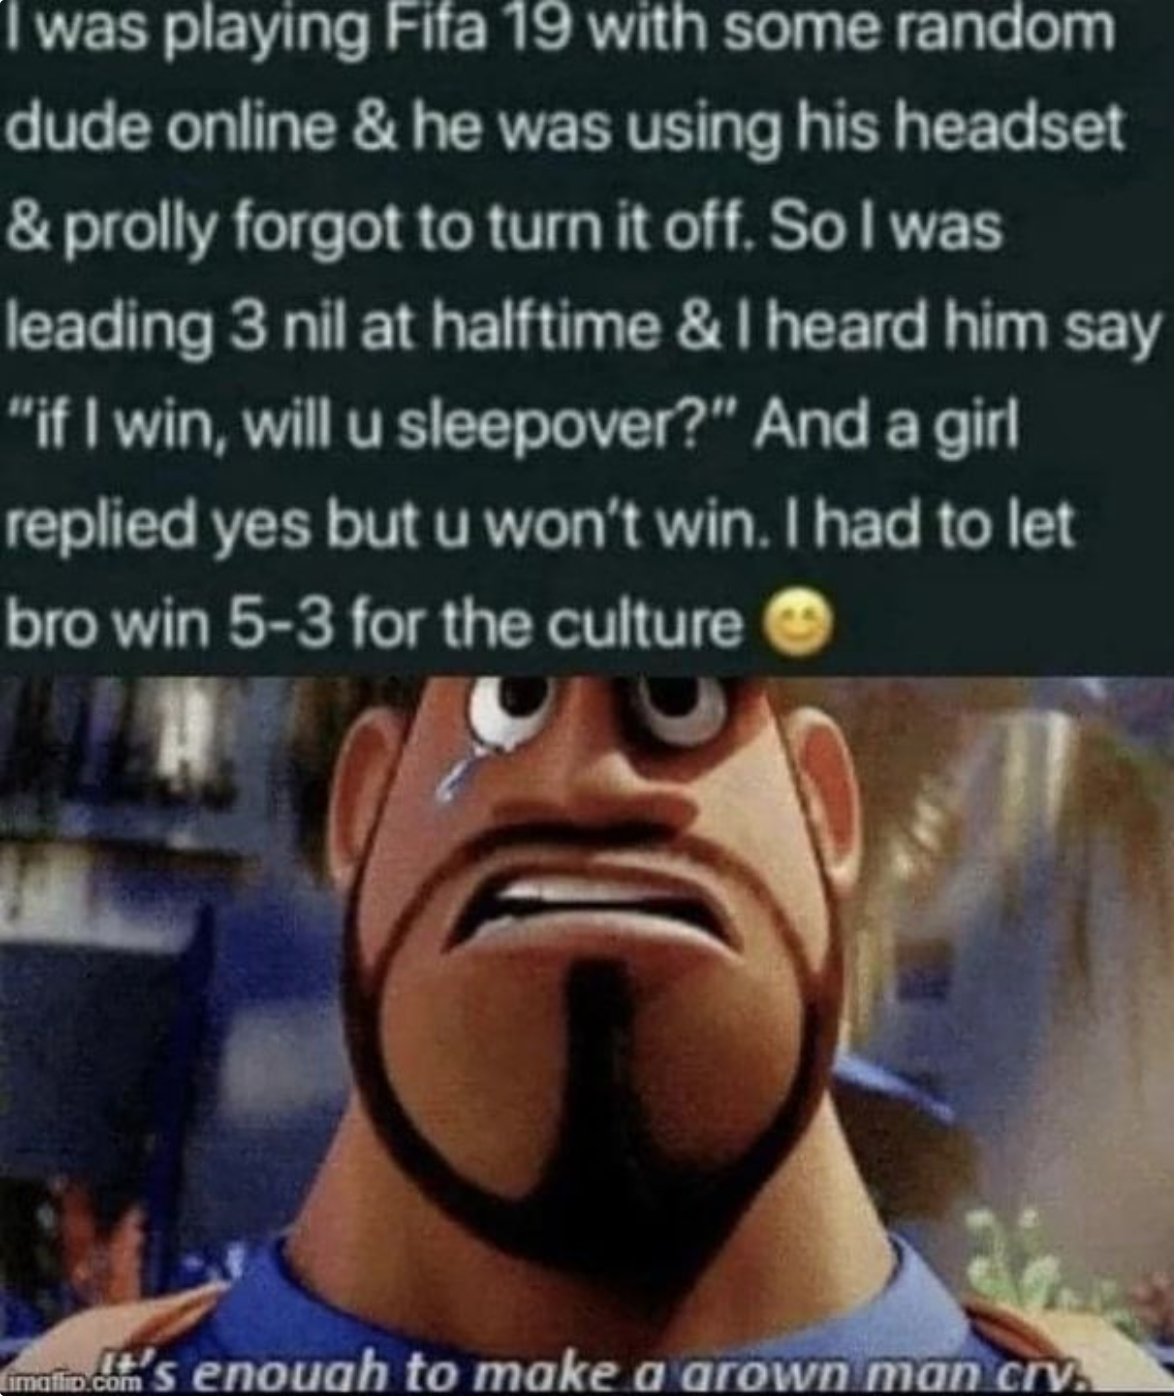 funny gaming memes - enough to make a grown man cry meme - I was playing Fifa 19 with some random dude online & he was using his headset & prolly forgot to turn it off. So I was leading 3 nil at halftime & I heard him say "if I win, will u sleepover?" And